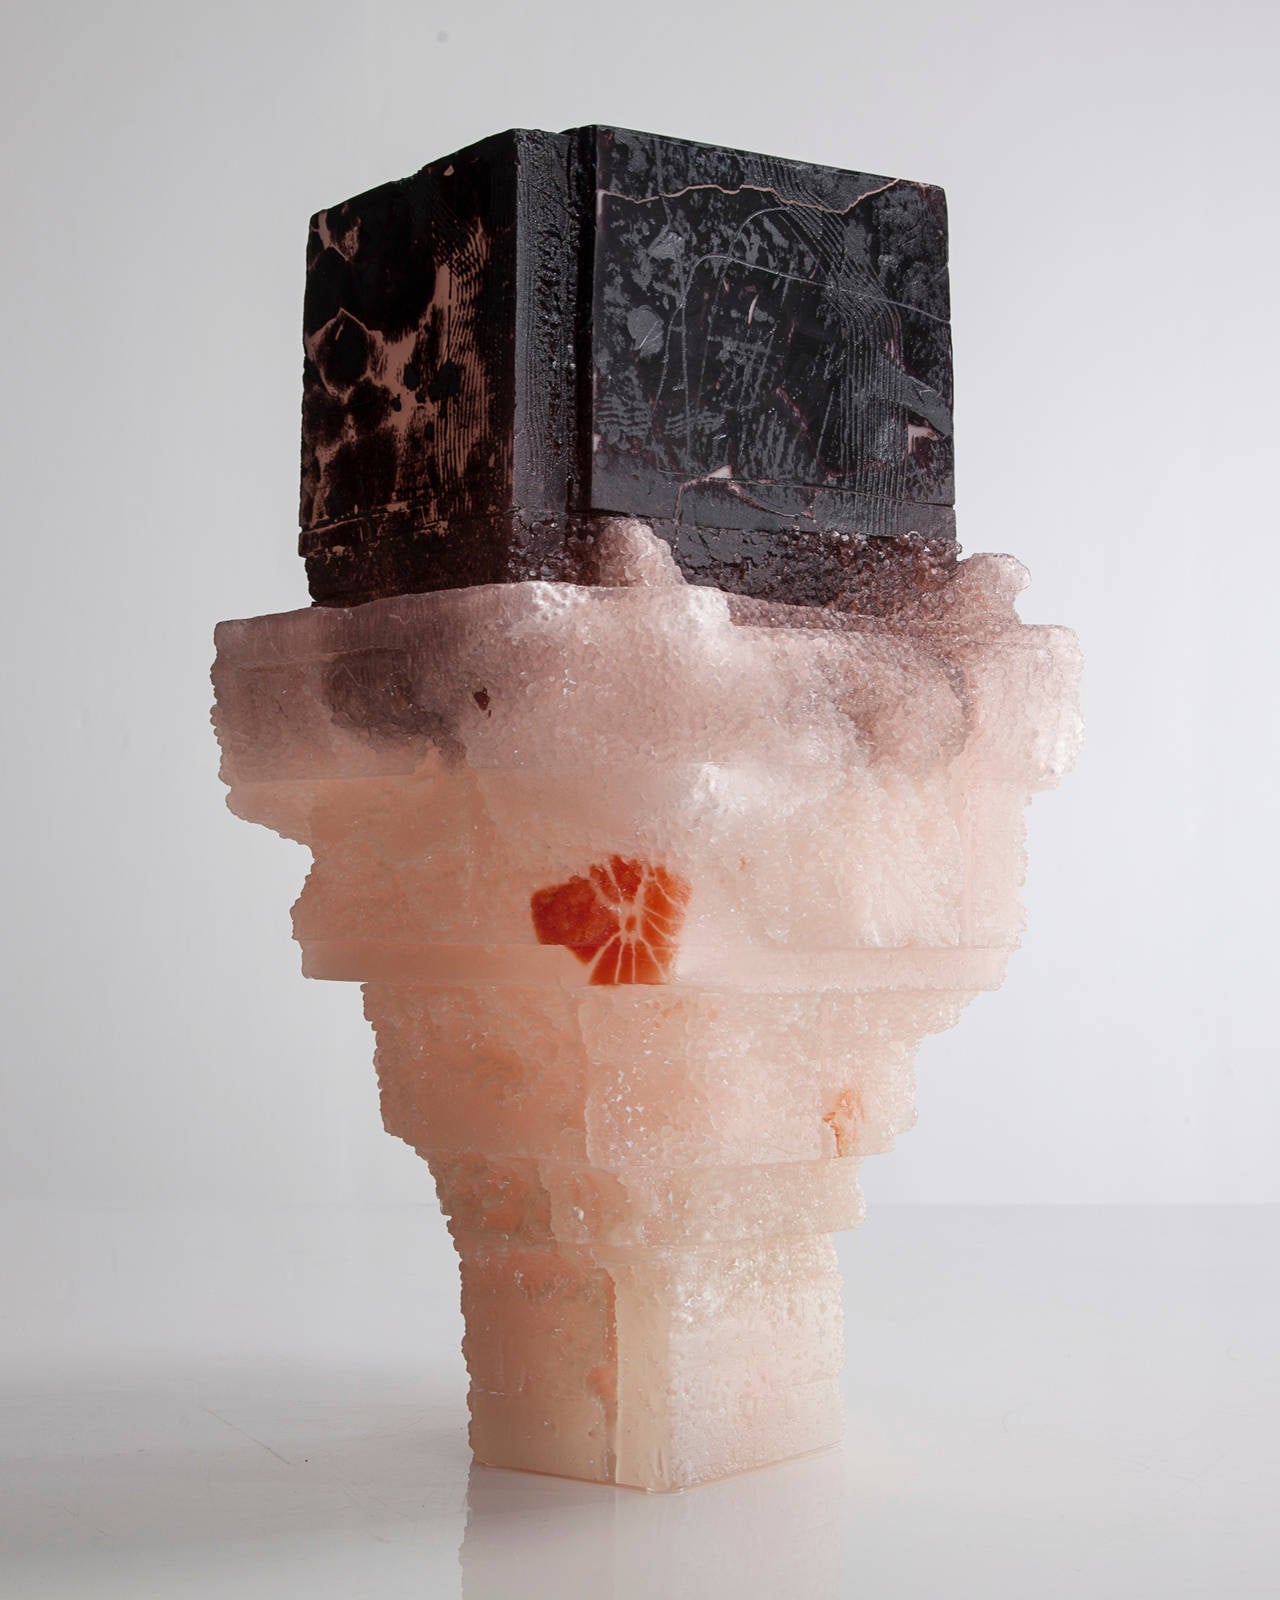 SG1829.

Unique Assemblage vessel in black and pale pink with pink interior handblown, cut and polished glass. Designed and made by Thaddeus Wolfe, USA, 2015.